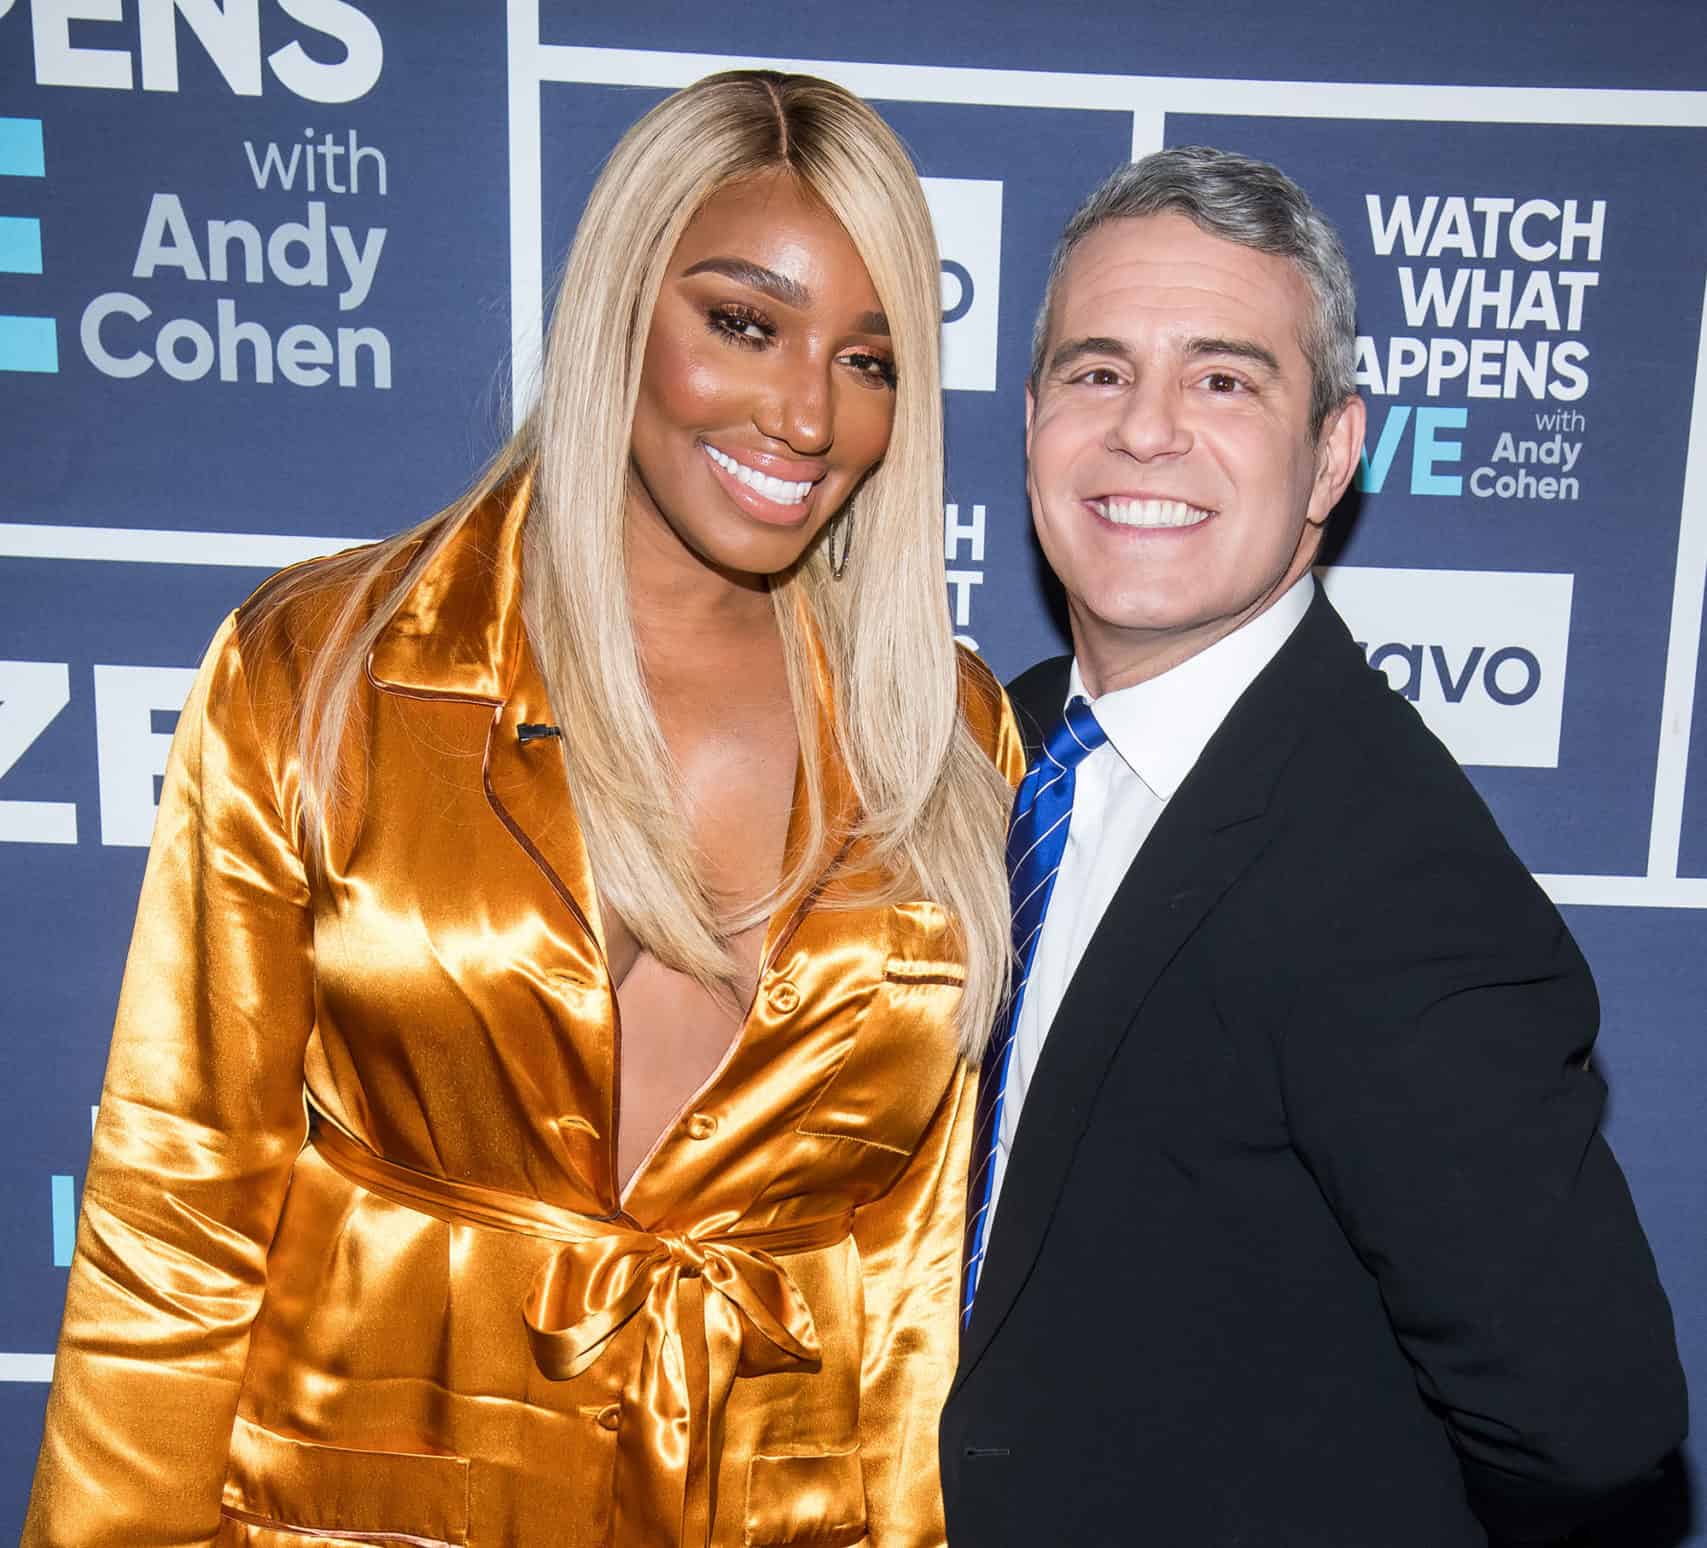 Andy Cohen says he's focused on the upcoming season after asking for his thoughts on Nene Leakes' return to RHOA.